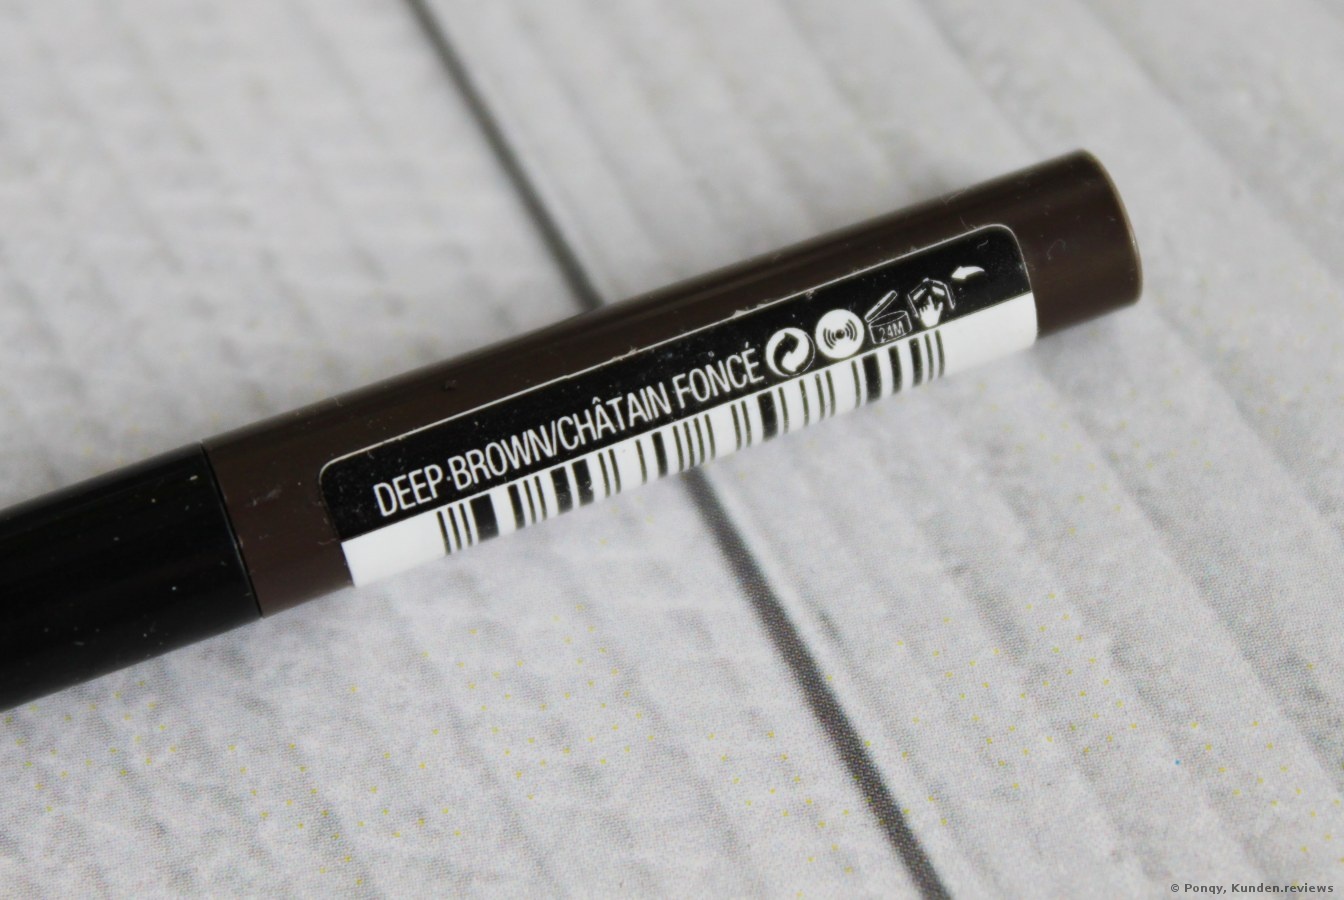 Maybelline Brow Precise Micro Pencil Review